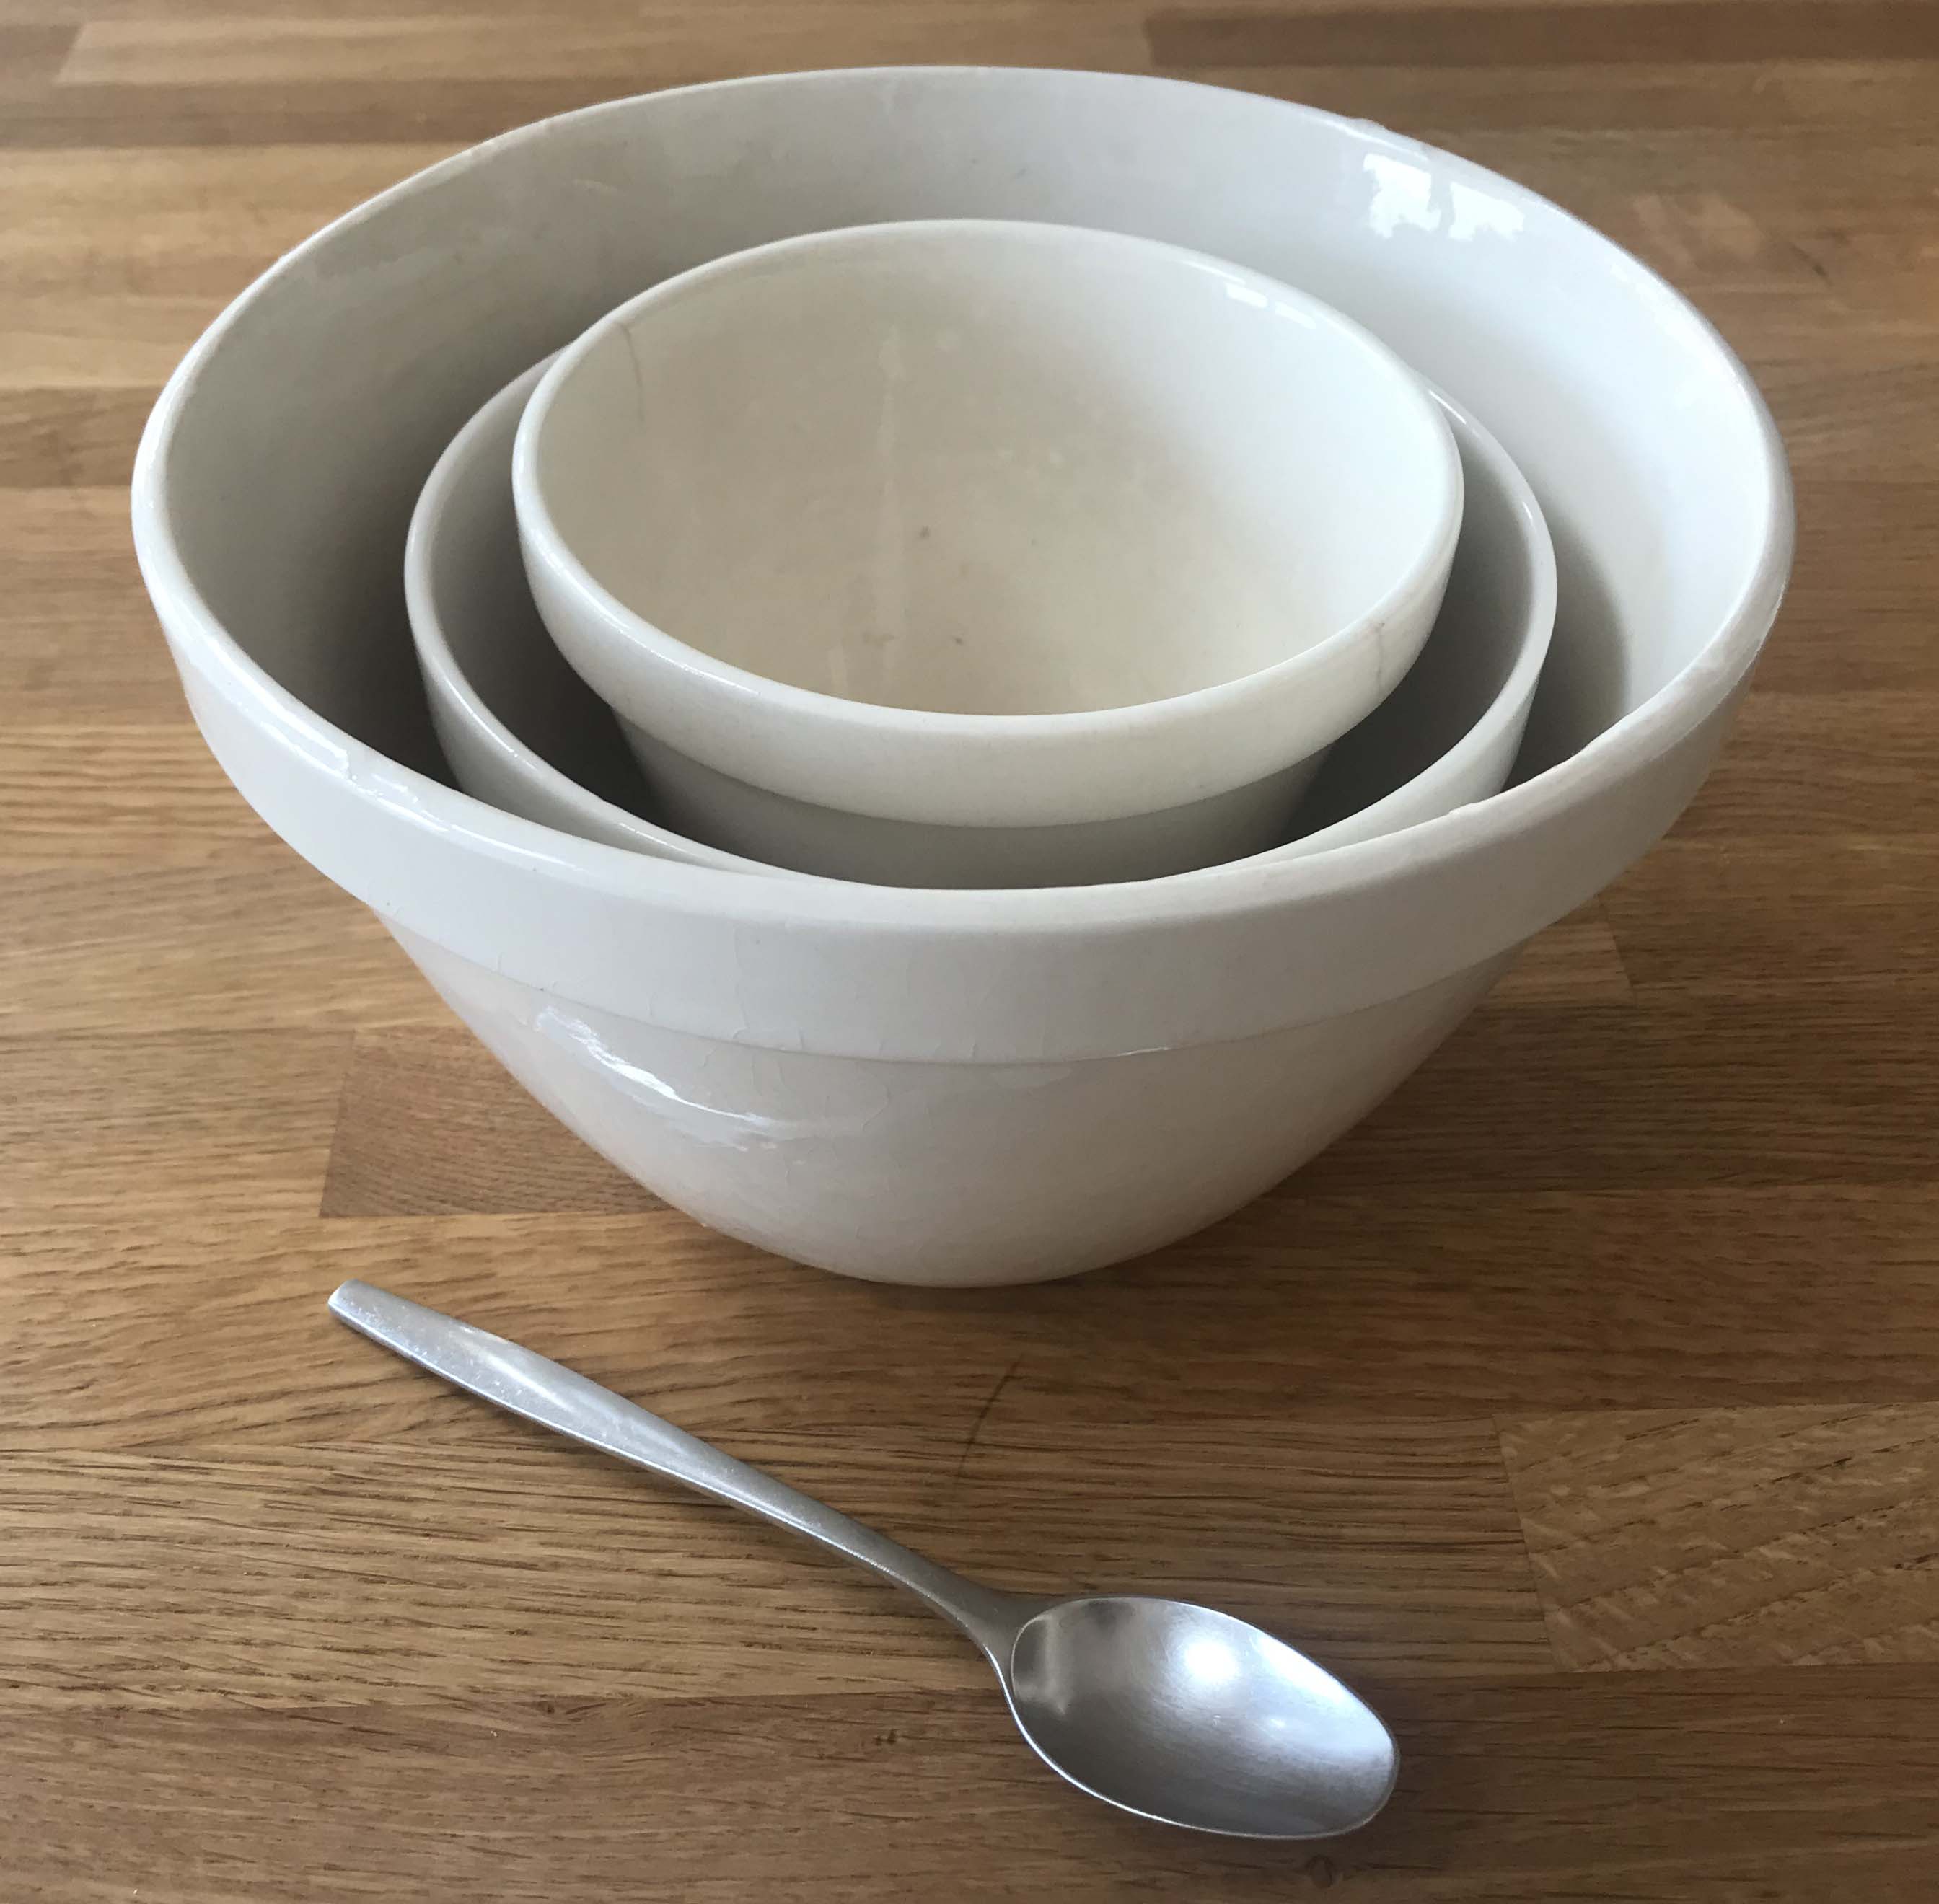 A stack of three white pudding bowls and a spoon on a kitchen worksurface